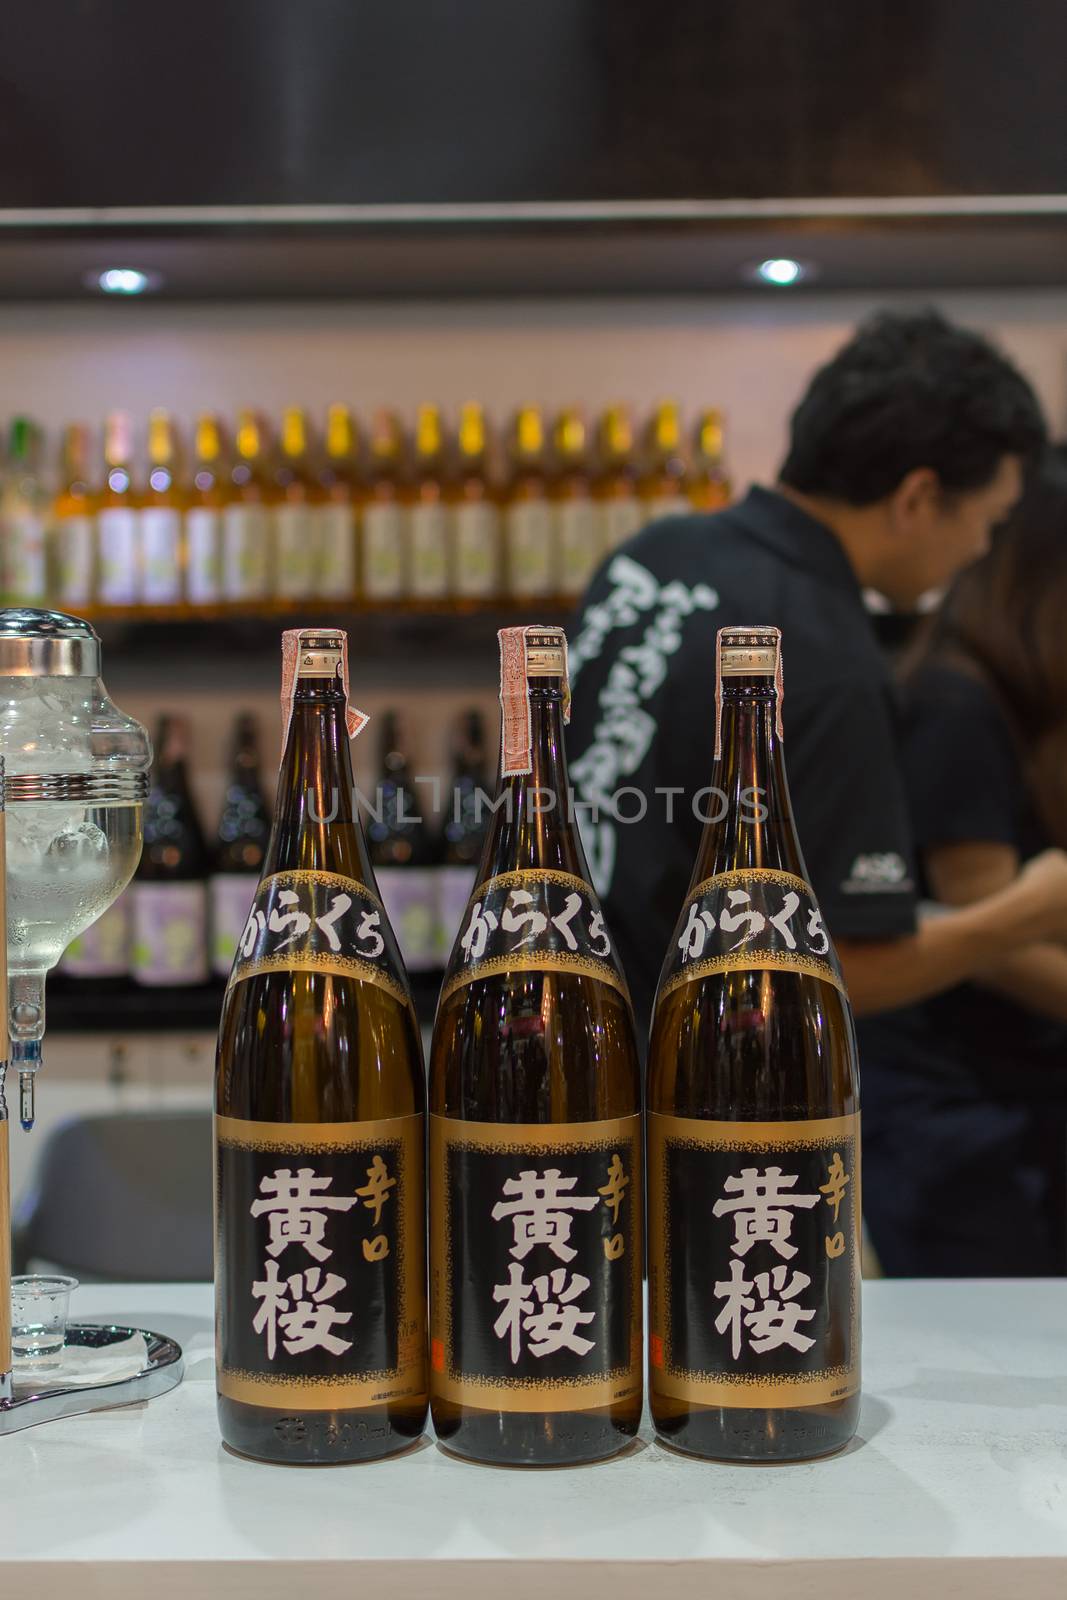 Bangkok, Thailand - May 28, 2016 : Bottles of japan liquor at the bar. Japan liquor is a type of distilled alcoholic beverage made from fermented grain mash.